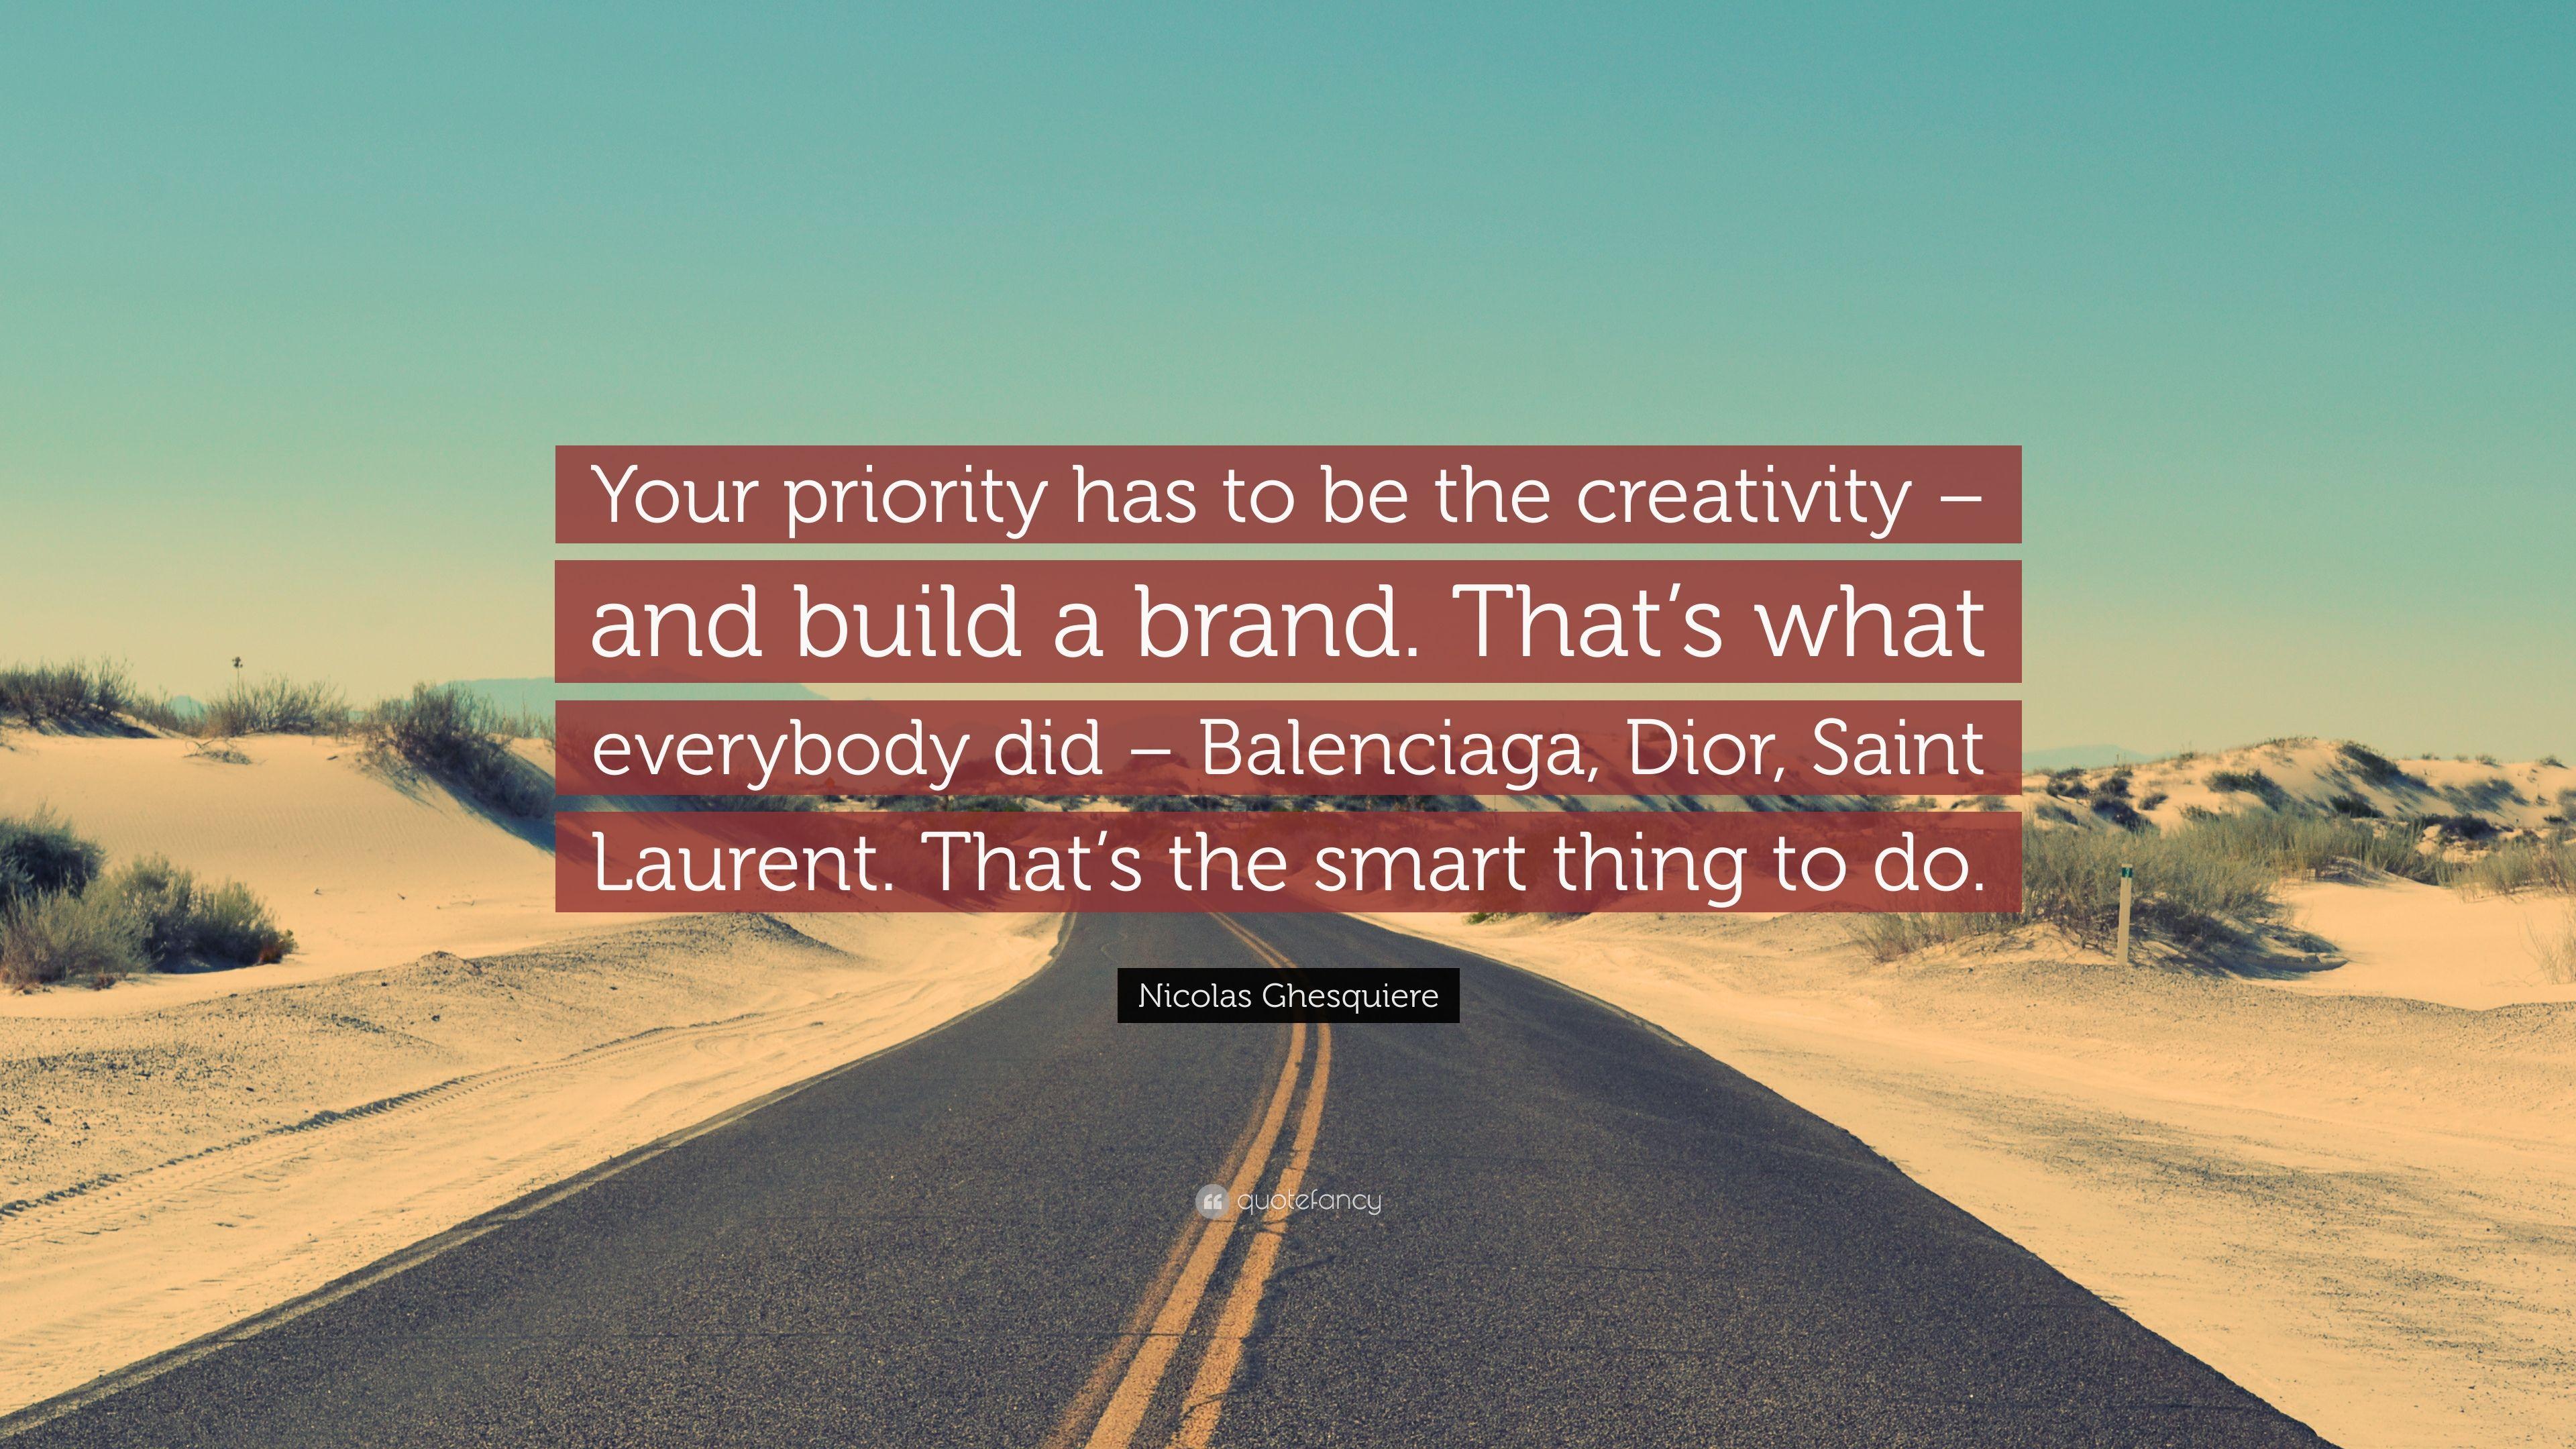 Nicolas Ghesquiere Quote: “Your priority has to be the creativity